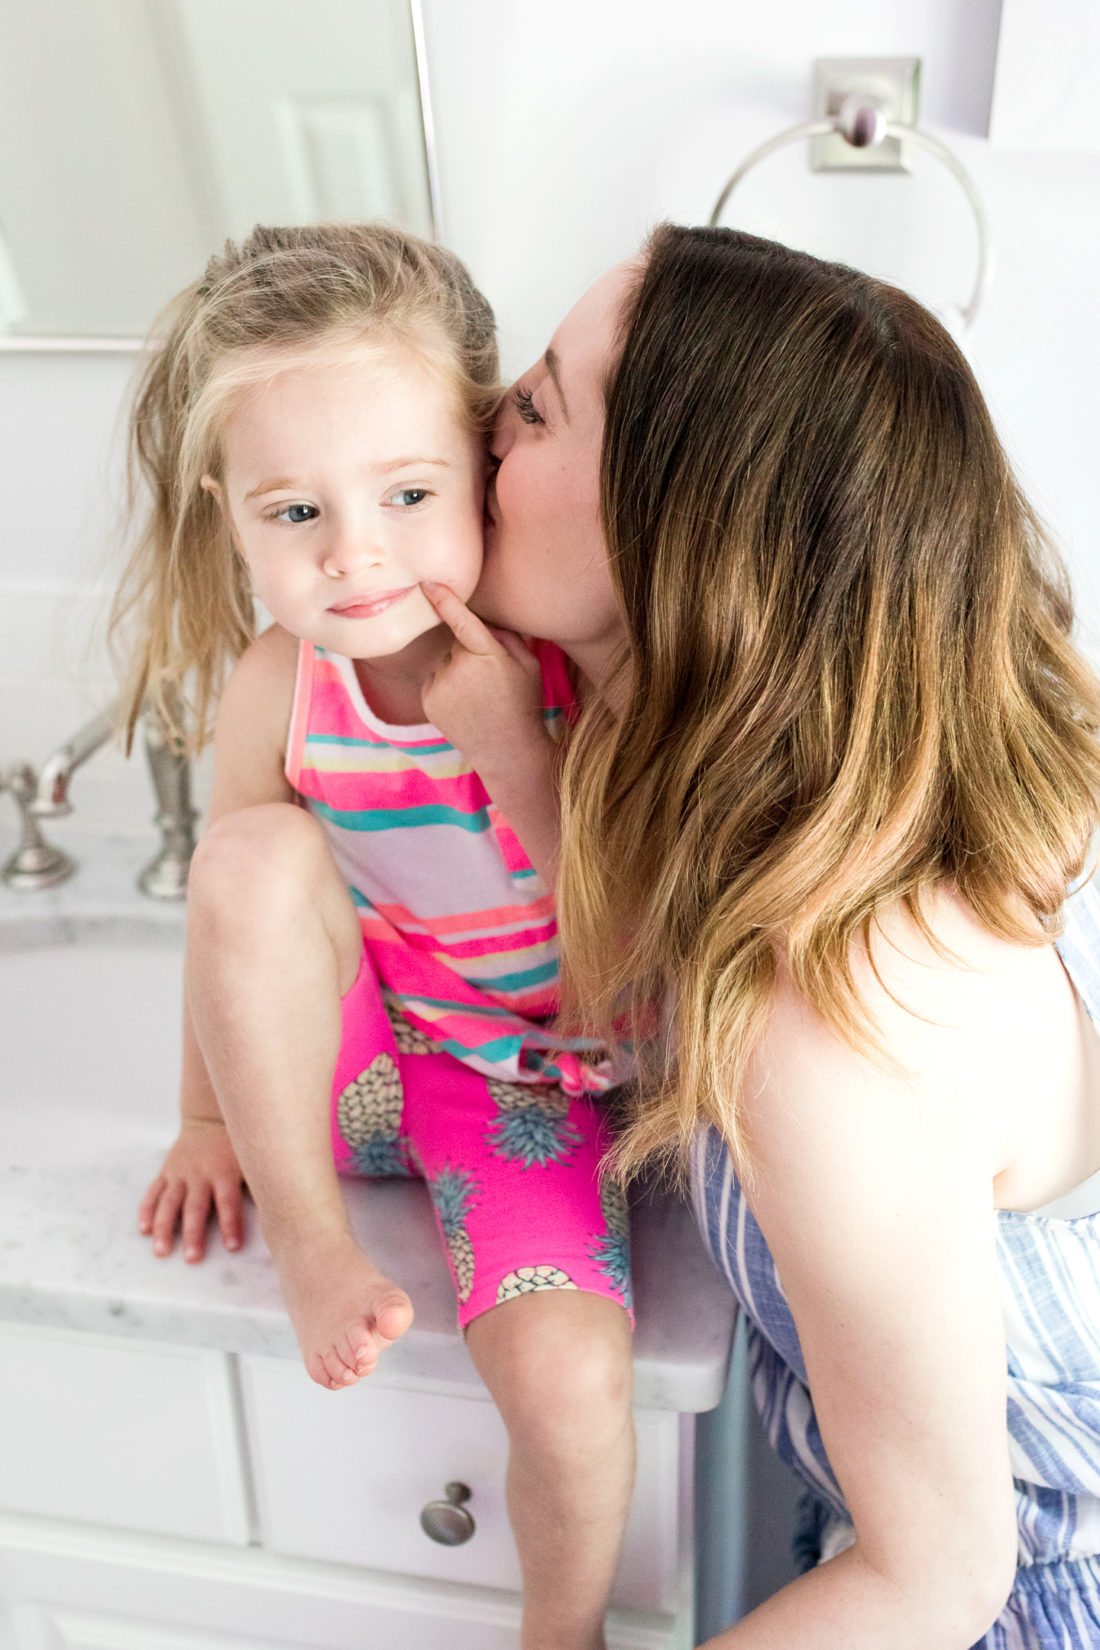 Eva Amurri Martino whispers in to Marlowe Martino's ear in the bathroom of their Connecticut home